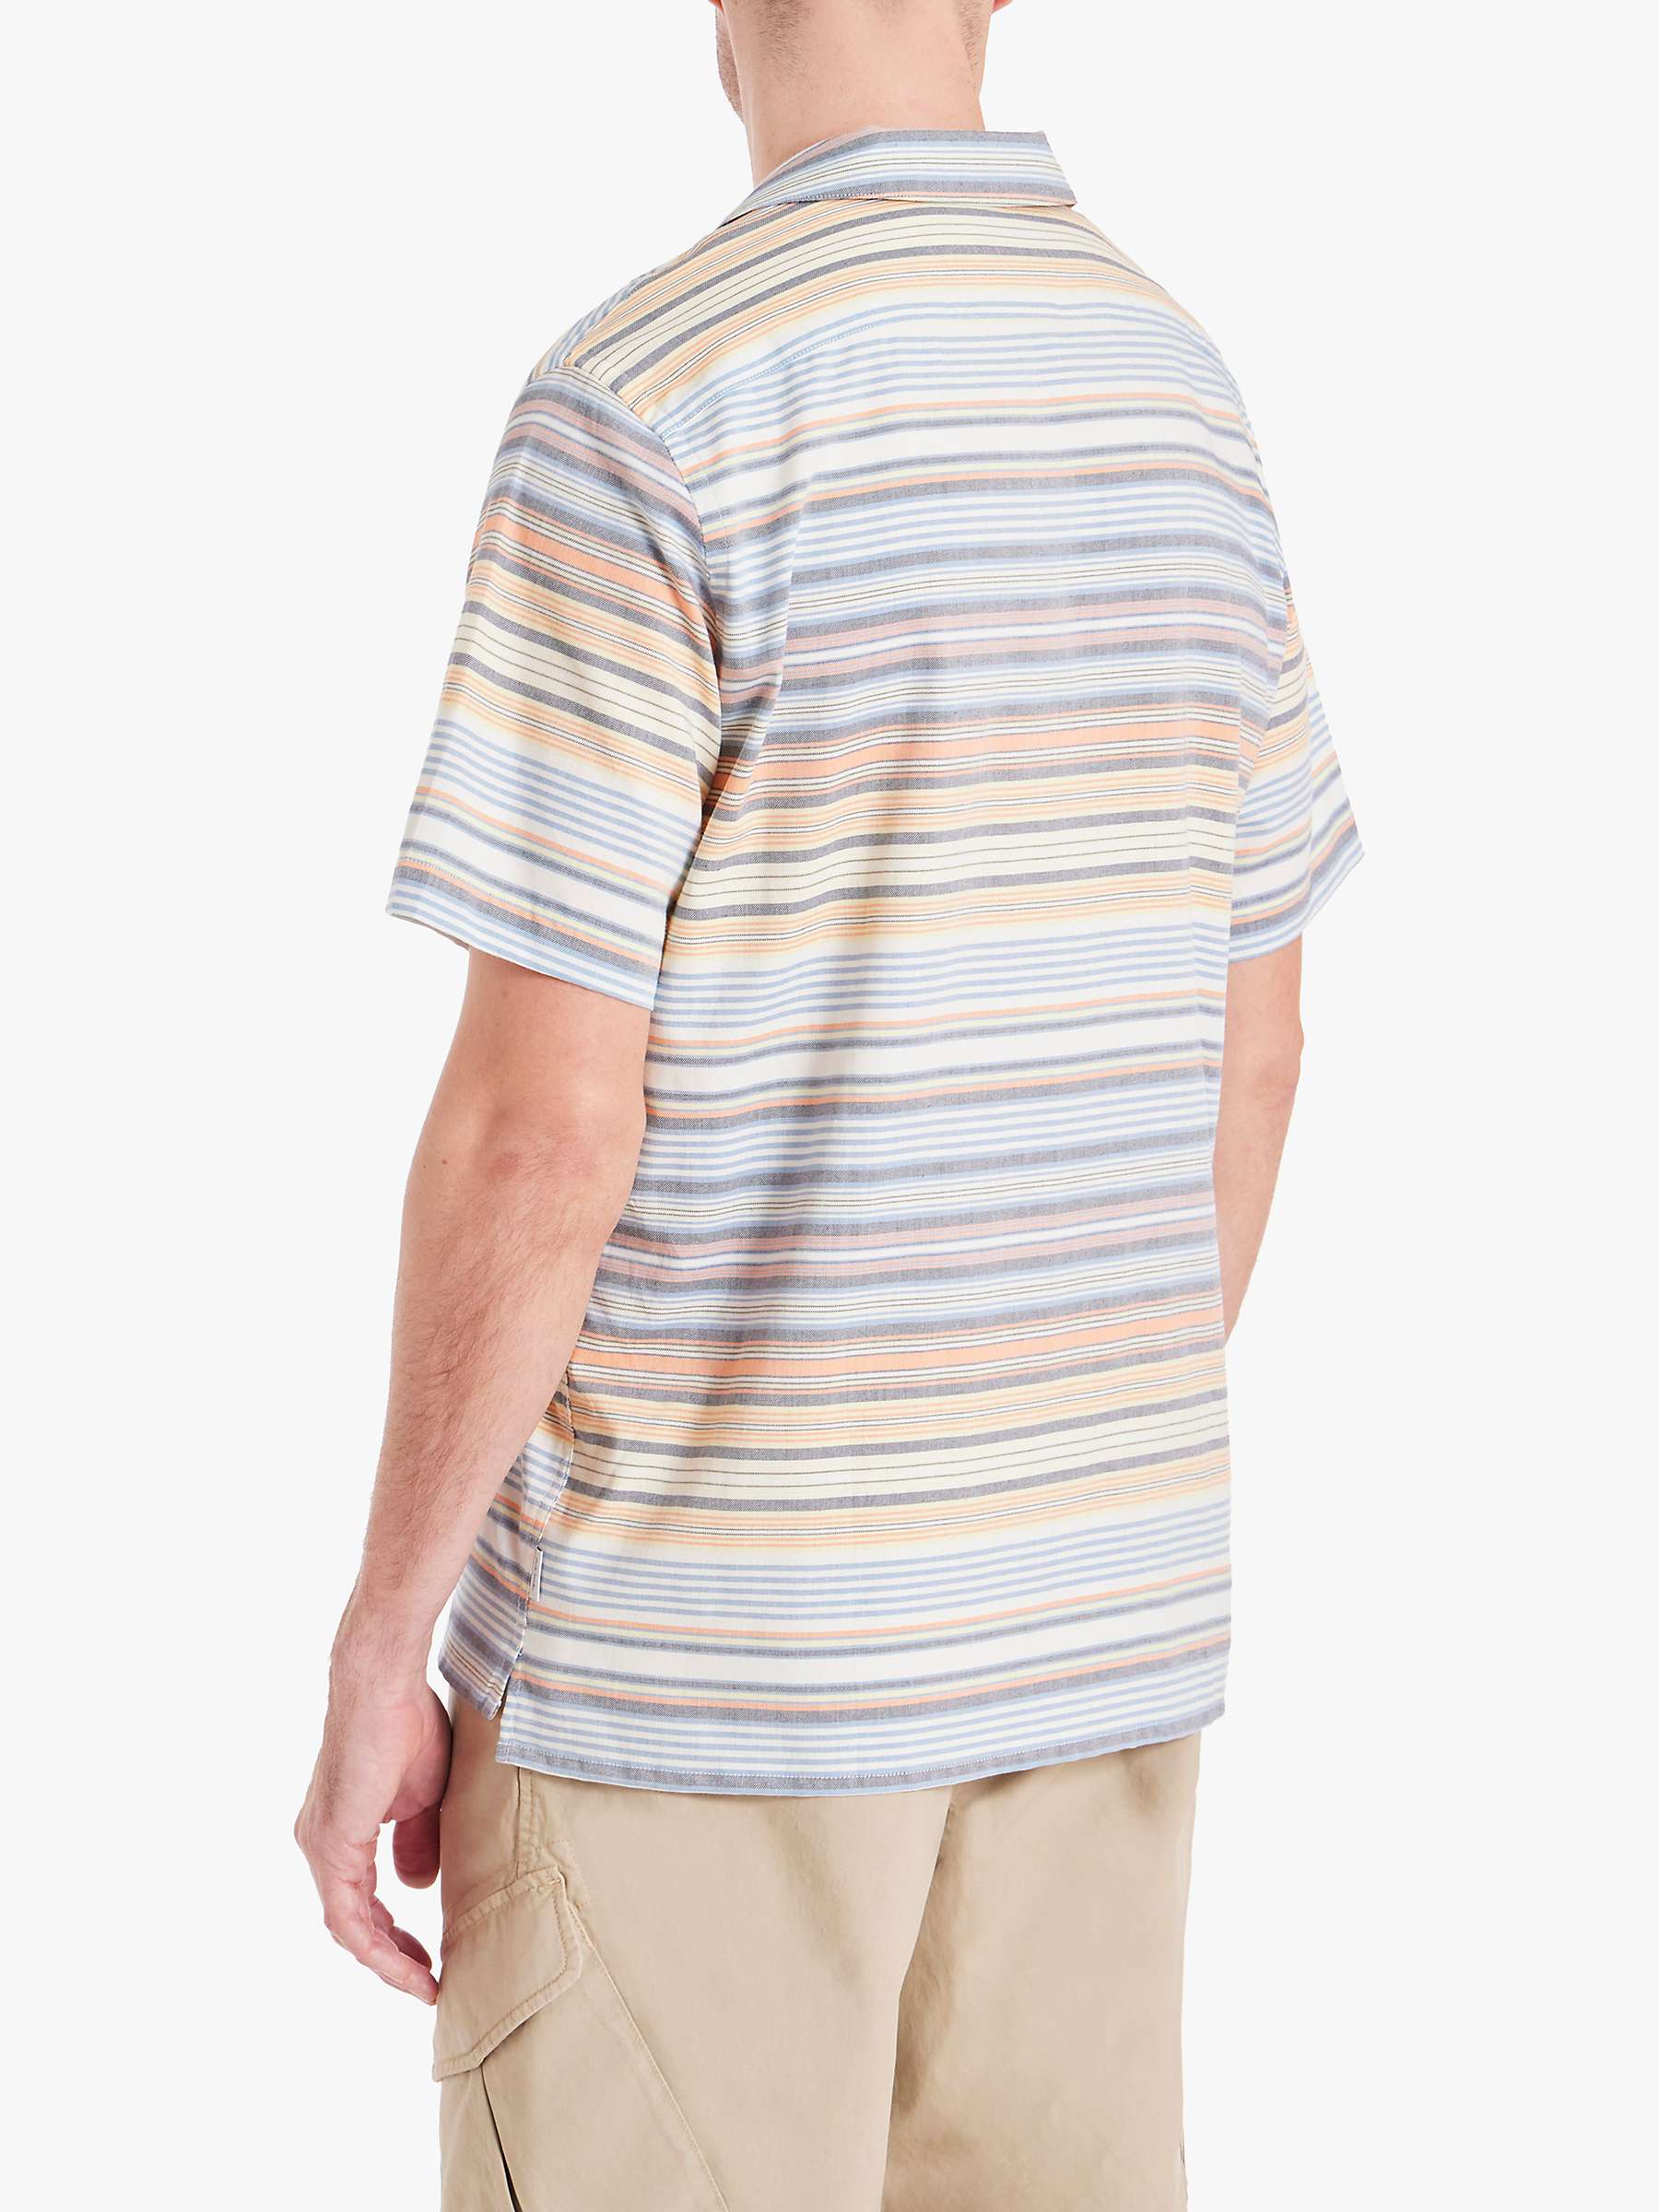 Buy Paul Smith Casual Fit Stripe Cotton Shirt, Multi Online at johnlewis.com